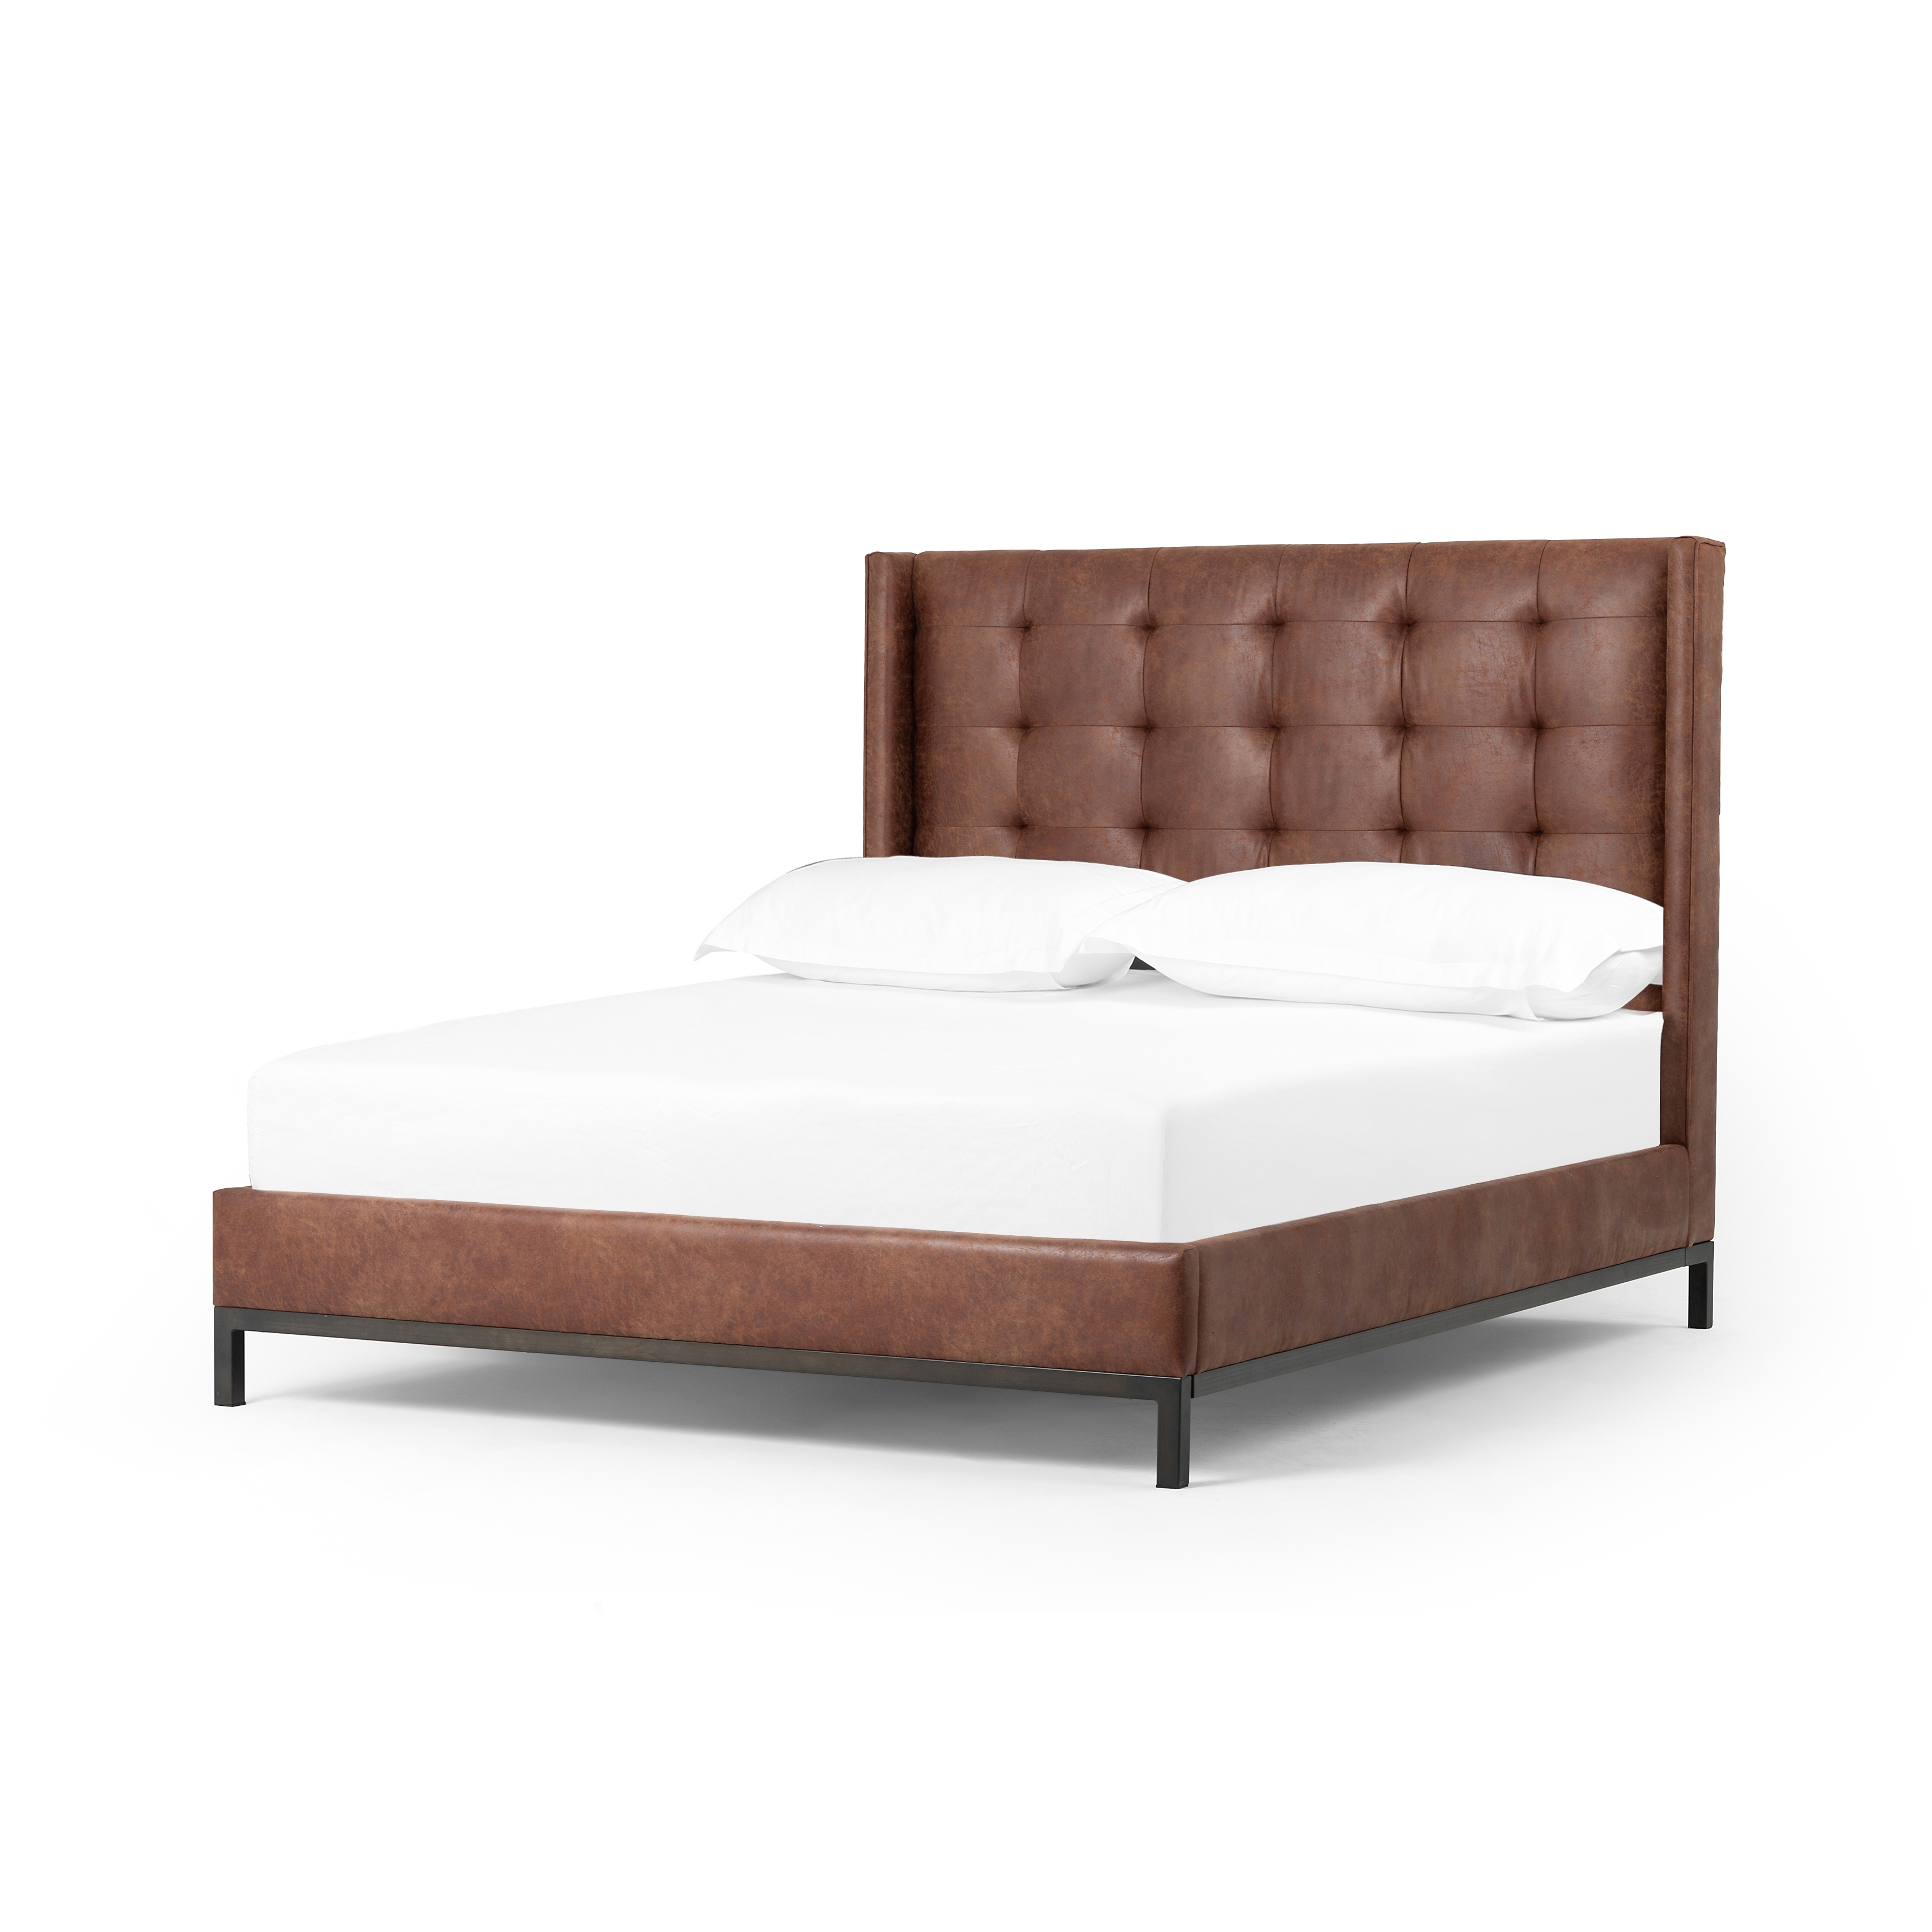 Newhall Bed - 55" - Vintage Tobacco - Image 0